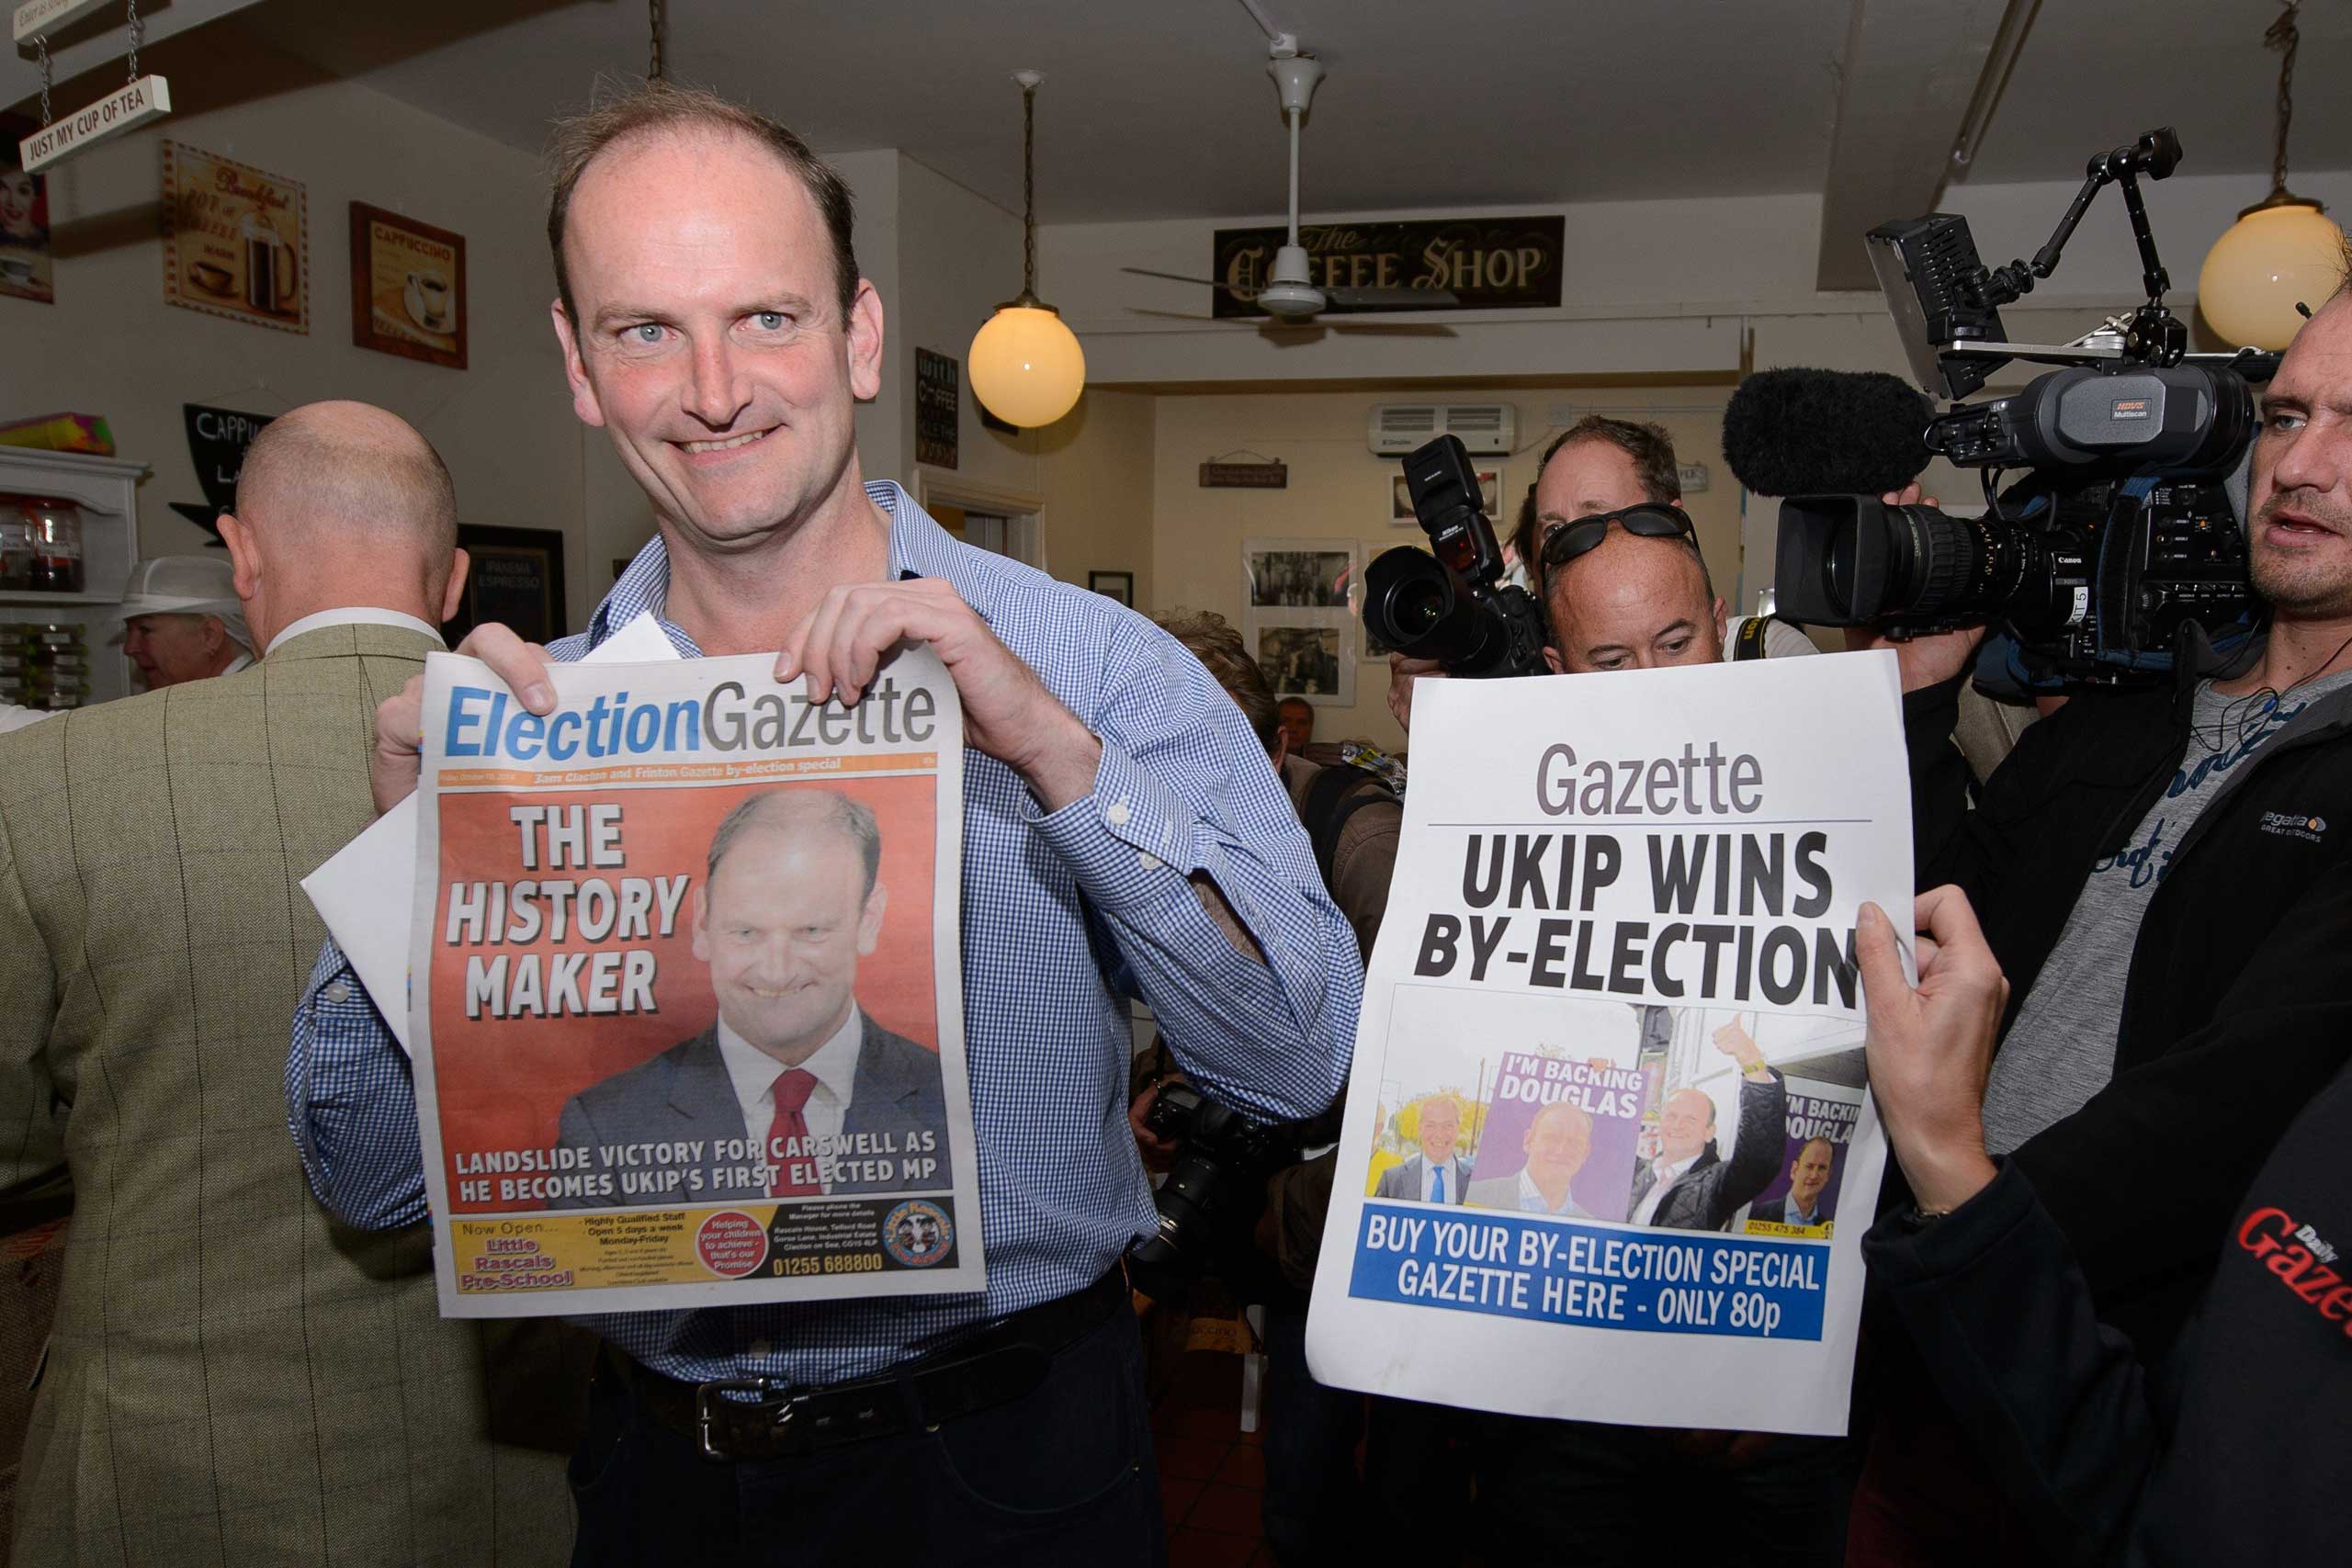 Newly-elected UK Independence Party MP Douglas Carswell poses for photographers with a copy of the local paper in Clacton-on-Sea, in eastern England, on Oct. 10, 2014. (Leon Neal—AFP/Getty Images)